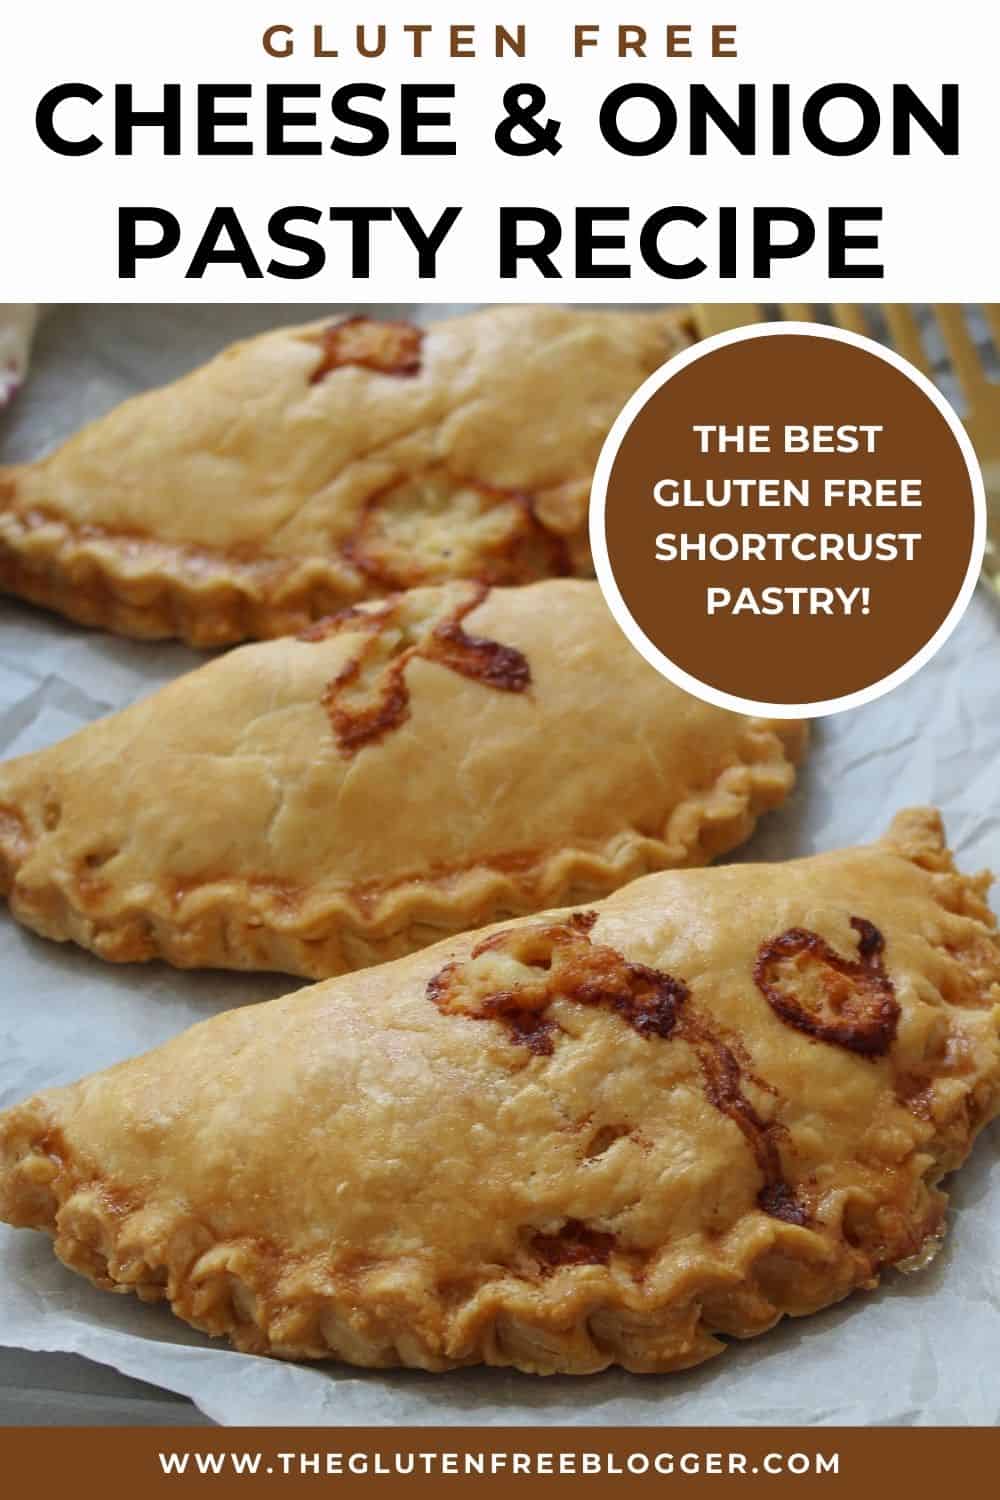 Gluten free cheese and onion pasty recipe